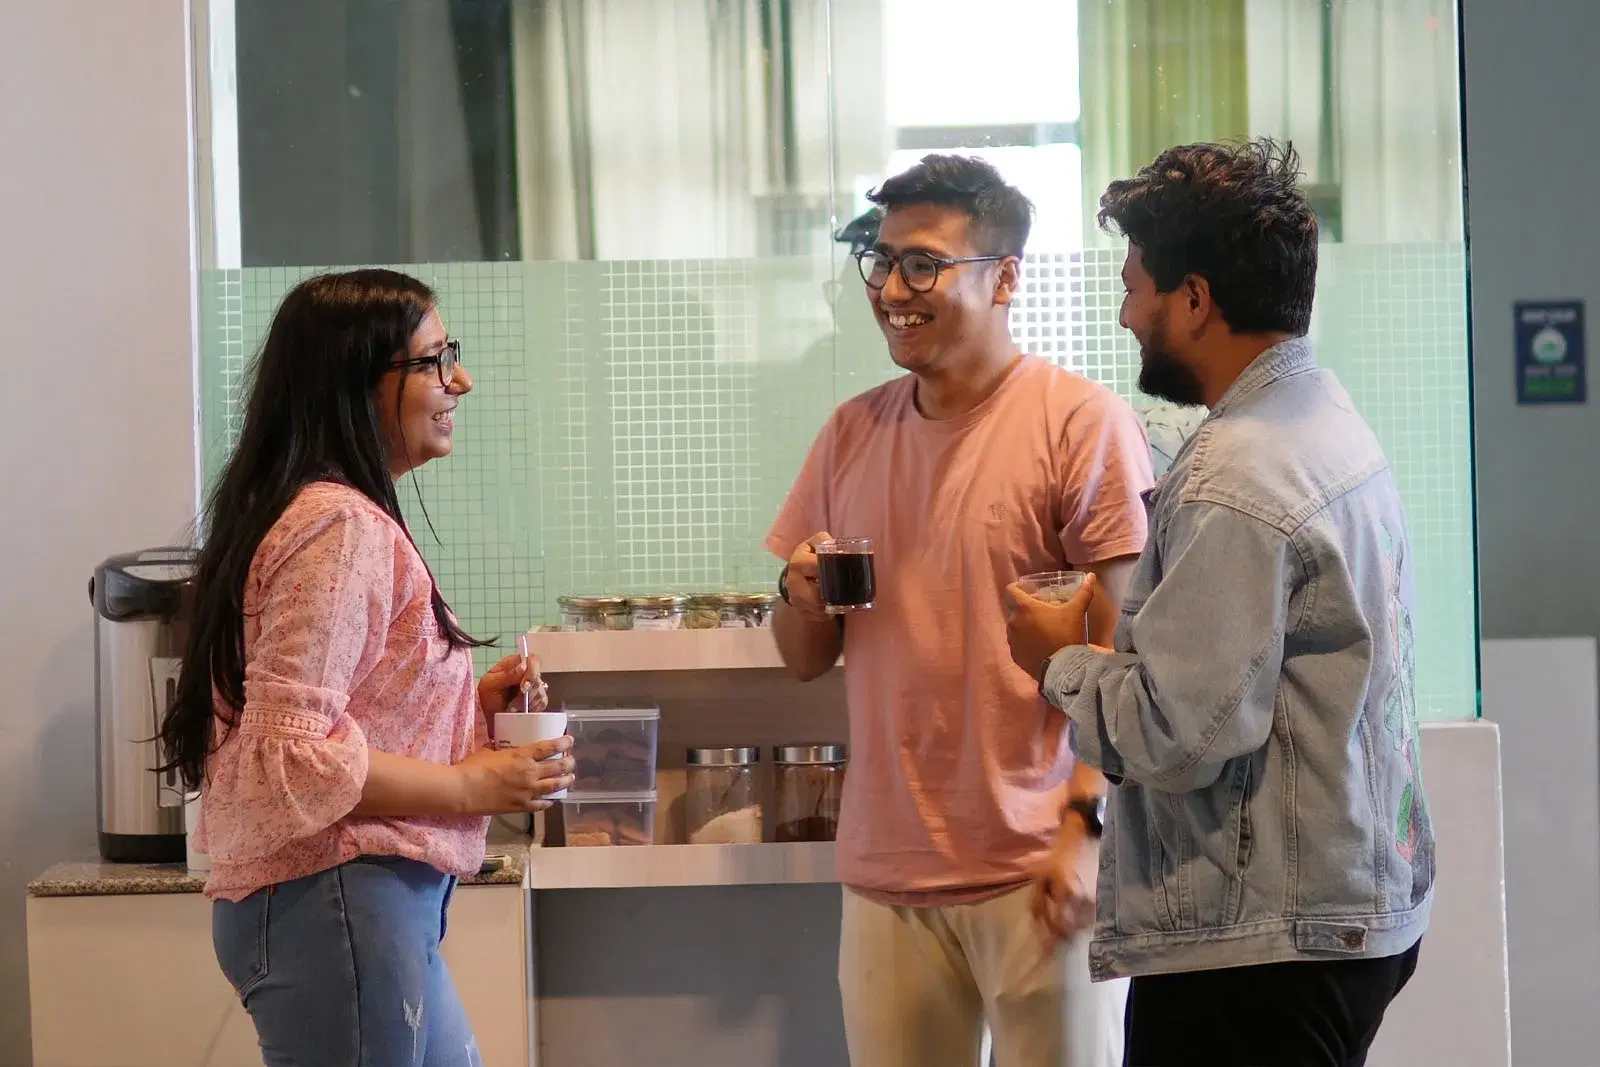 Female and two male employees enjoying coffee at a station, smiling as they socialize.